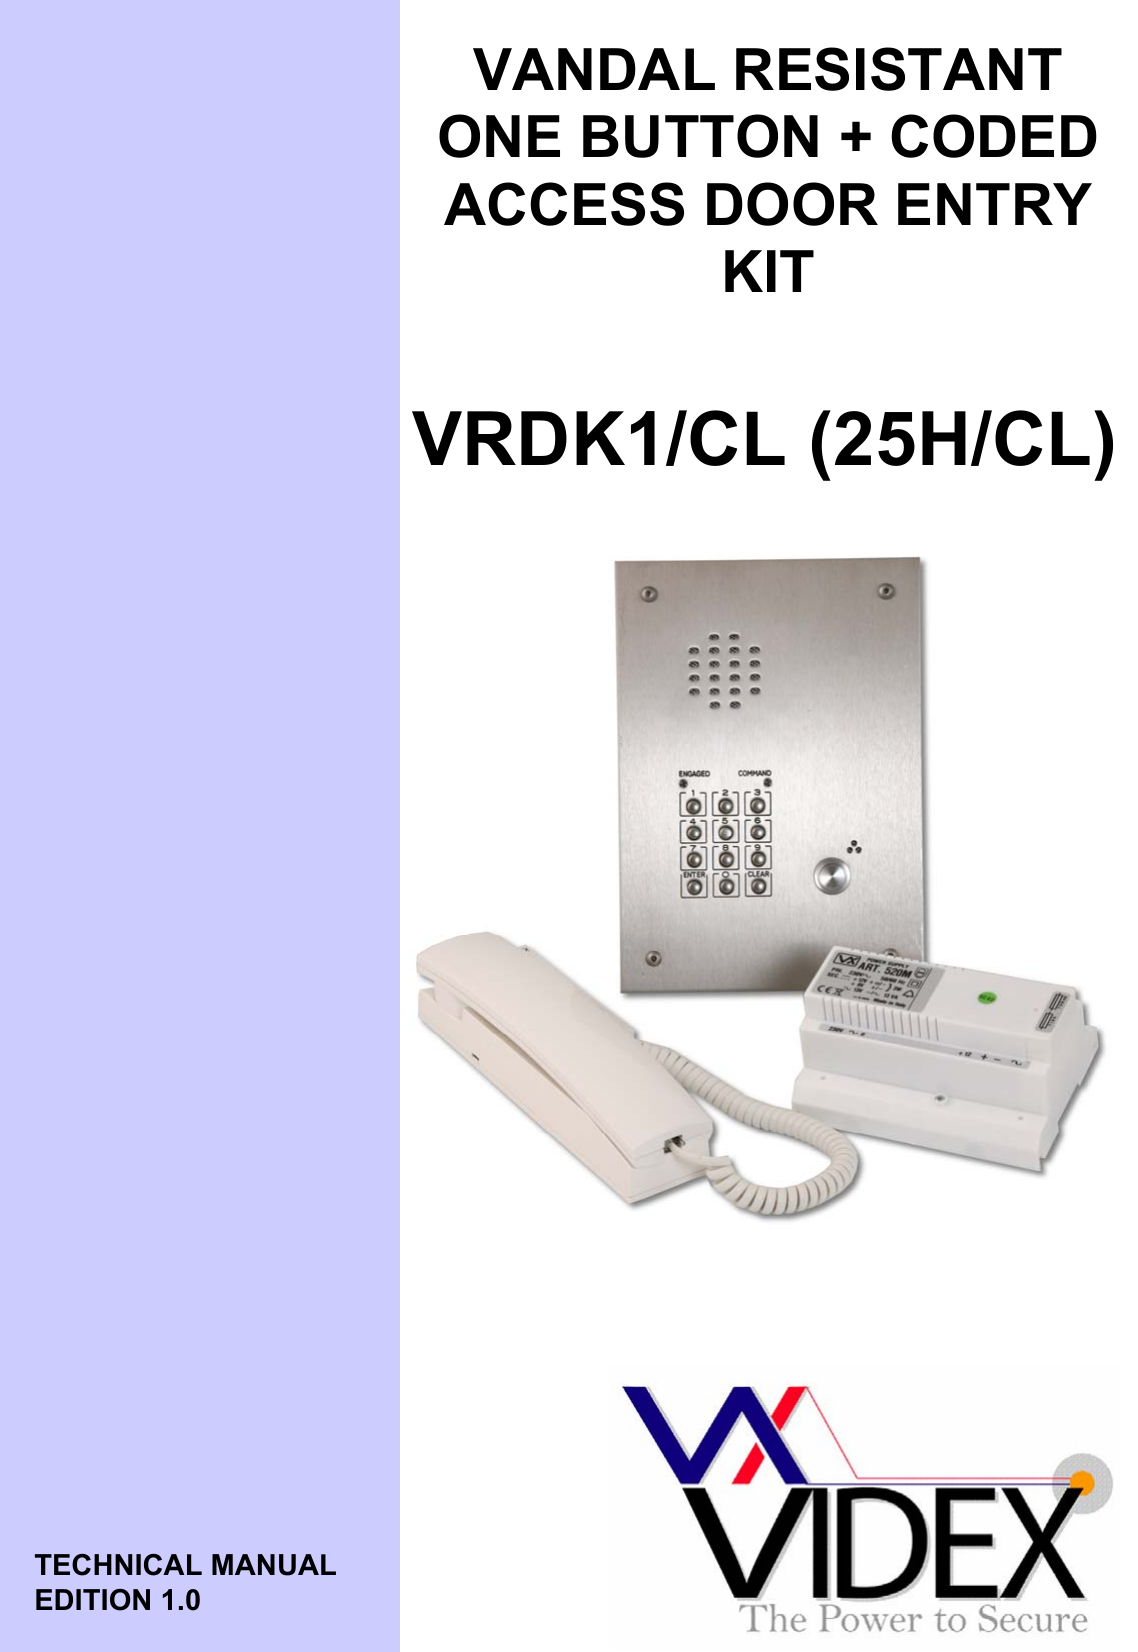 Page 1 of 12 - VRDK1CLManual Videx-VRDK1CL-Manual-with-codelock